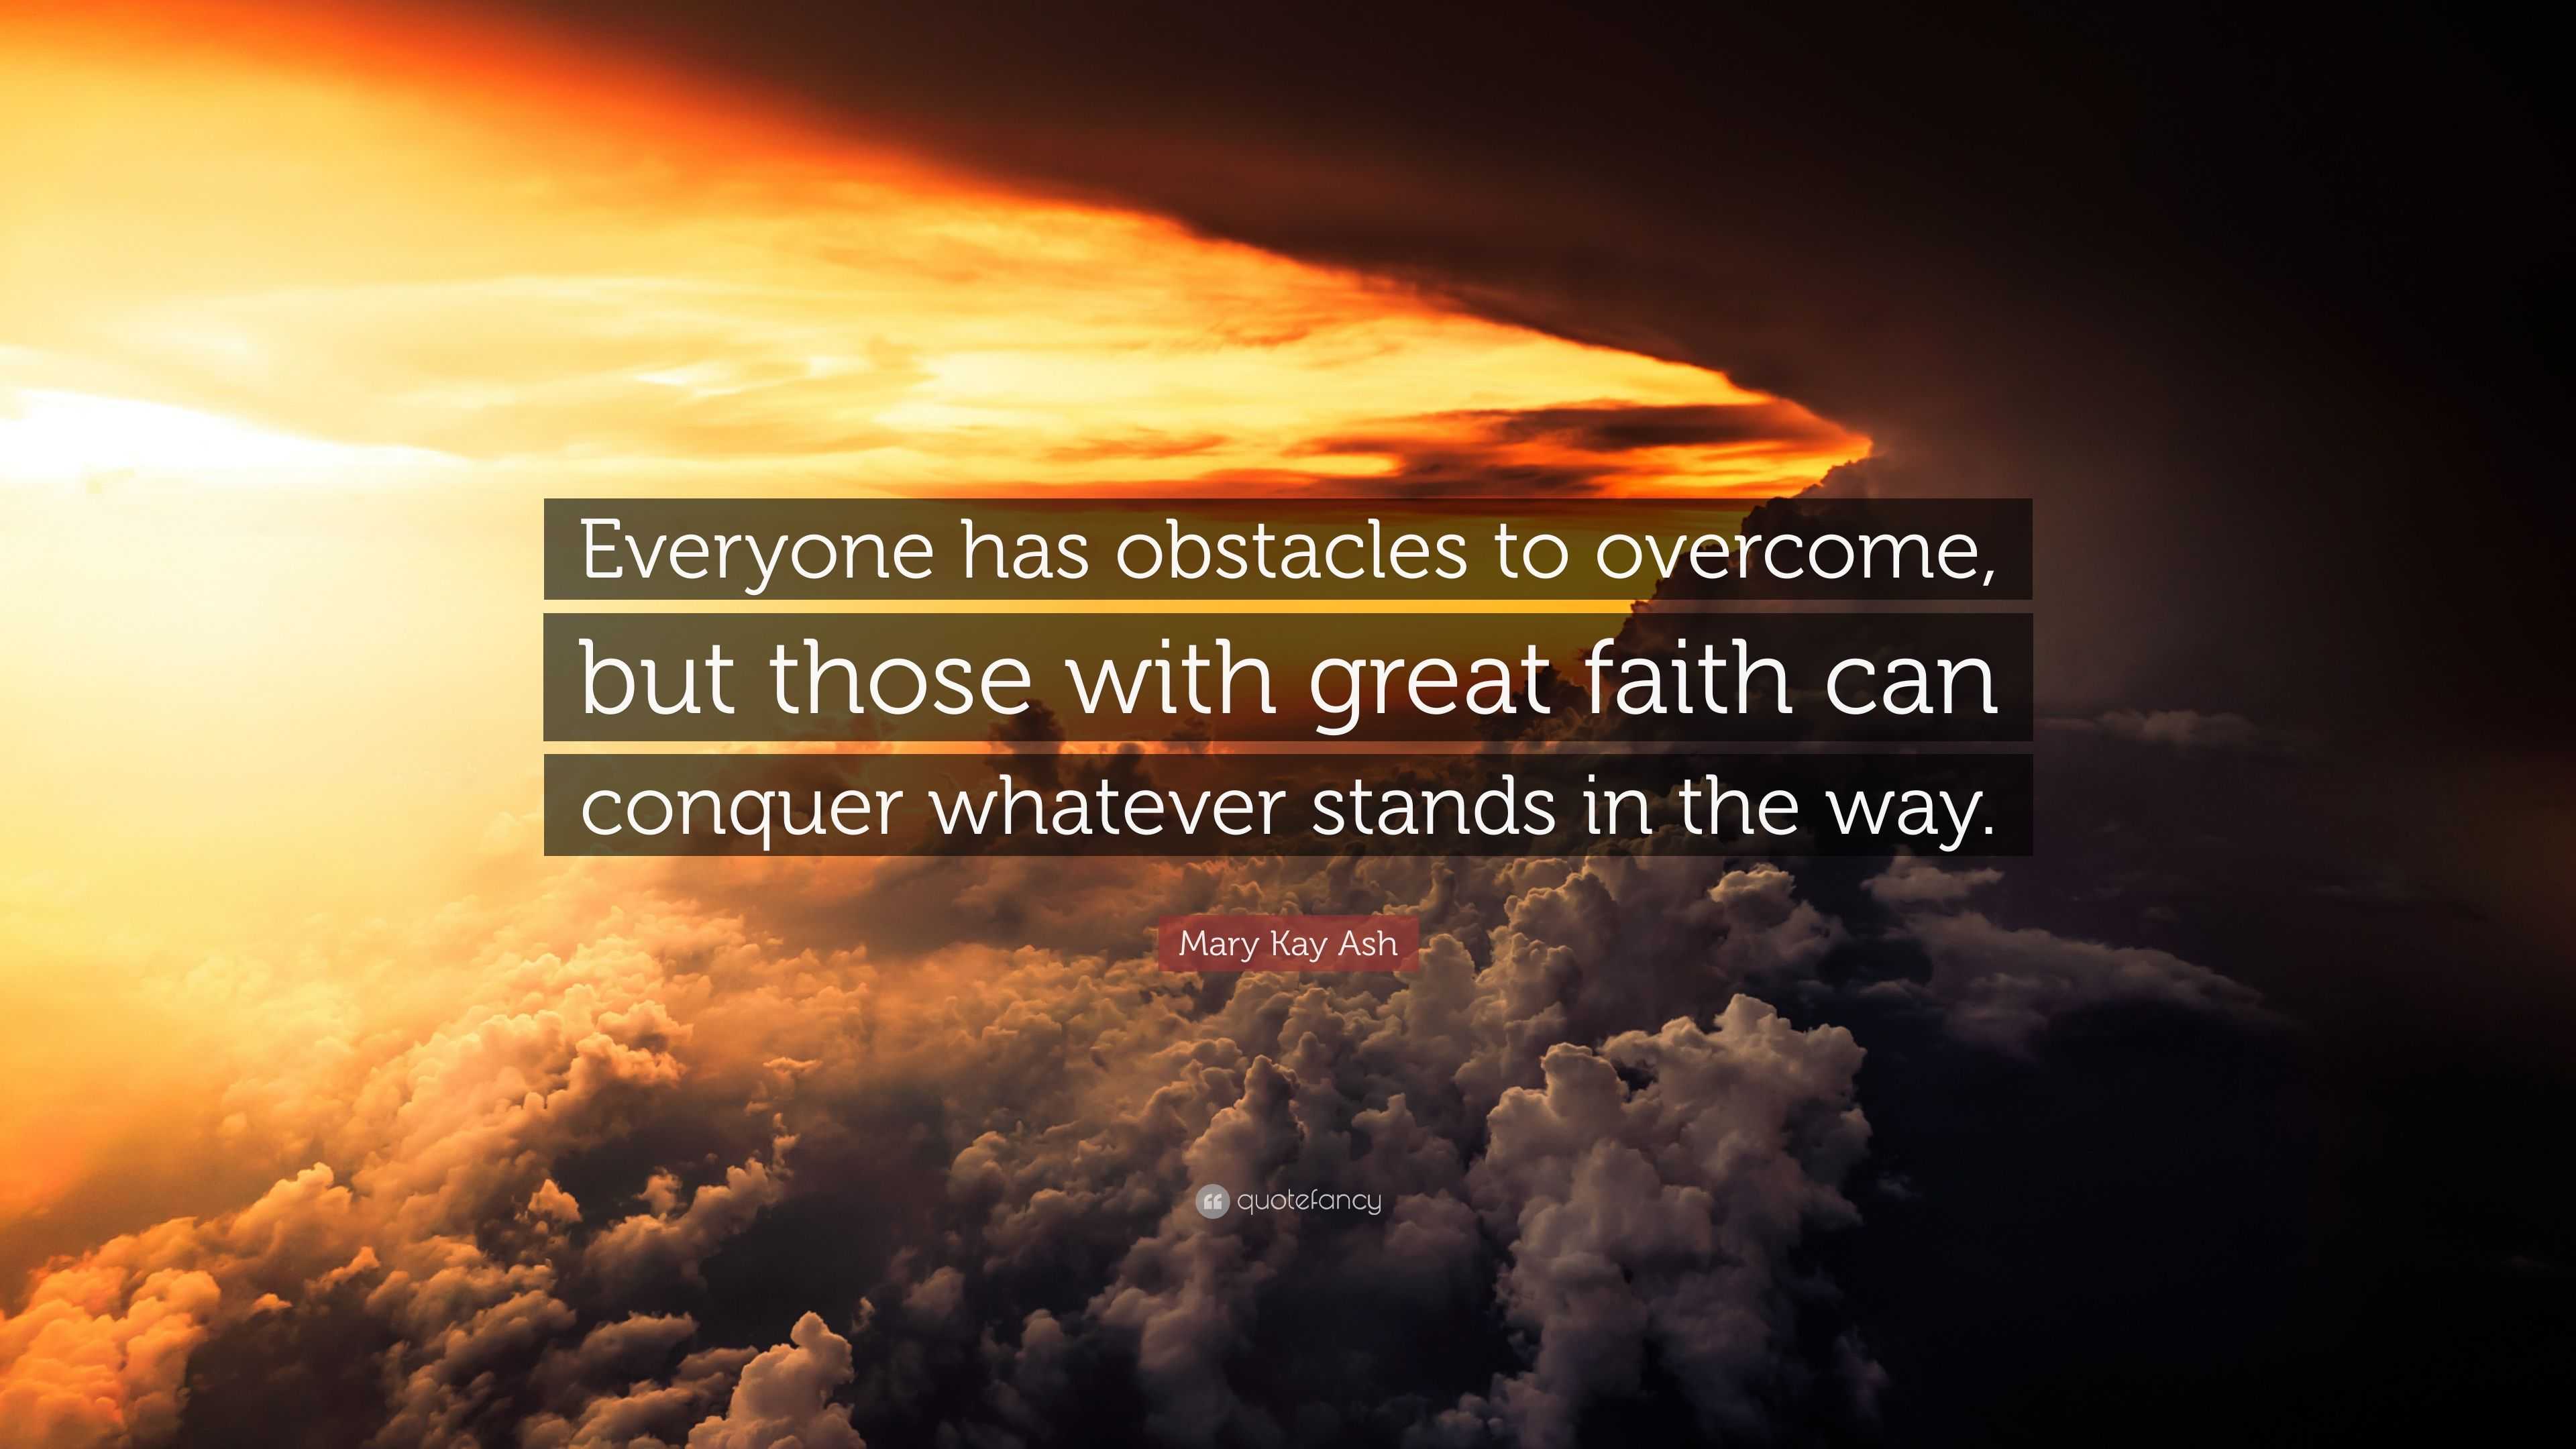 Mary Kay Ash Quote: "Everyone has obstacles to overcome ...